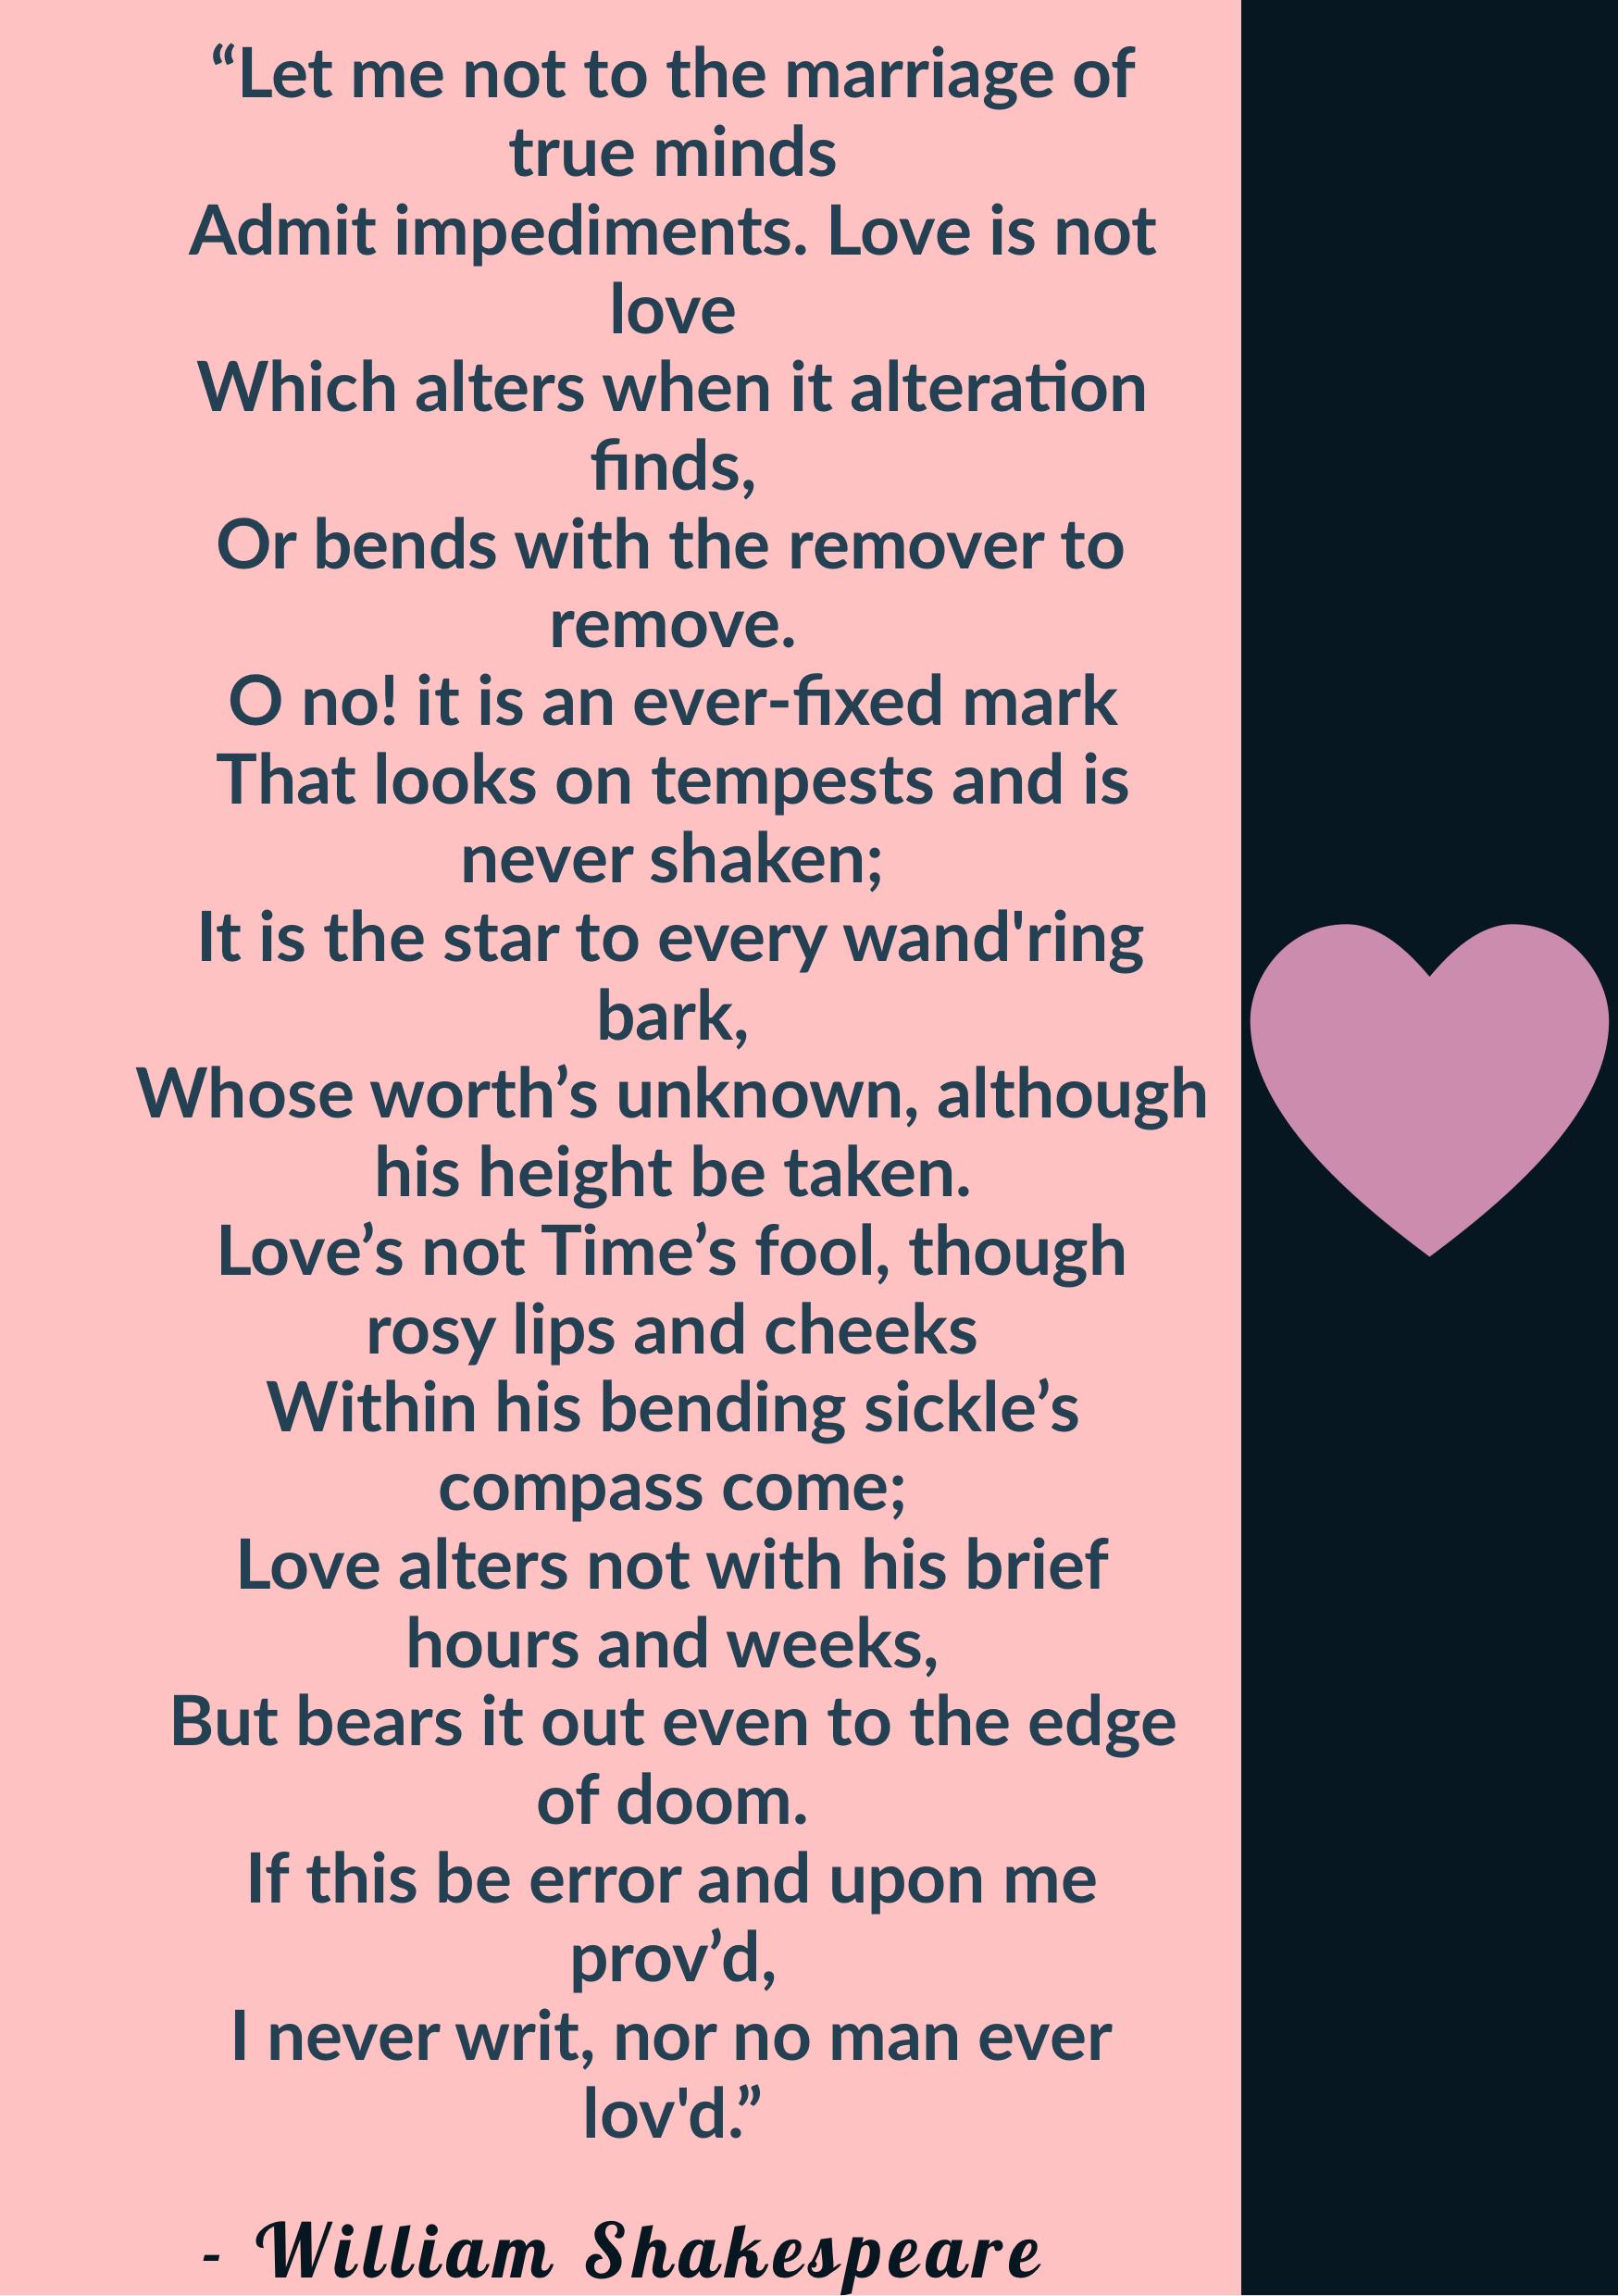 Edna Manley College on X: "Happy Valentine's Day, EMCVPA family! Let's see  how well you know one of the most popular love poems from the early 1600s.  Name the poet and the